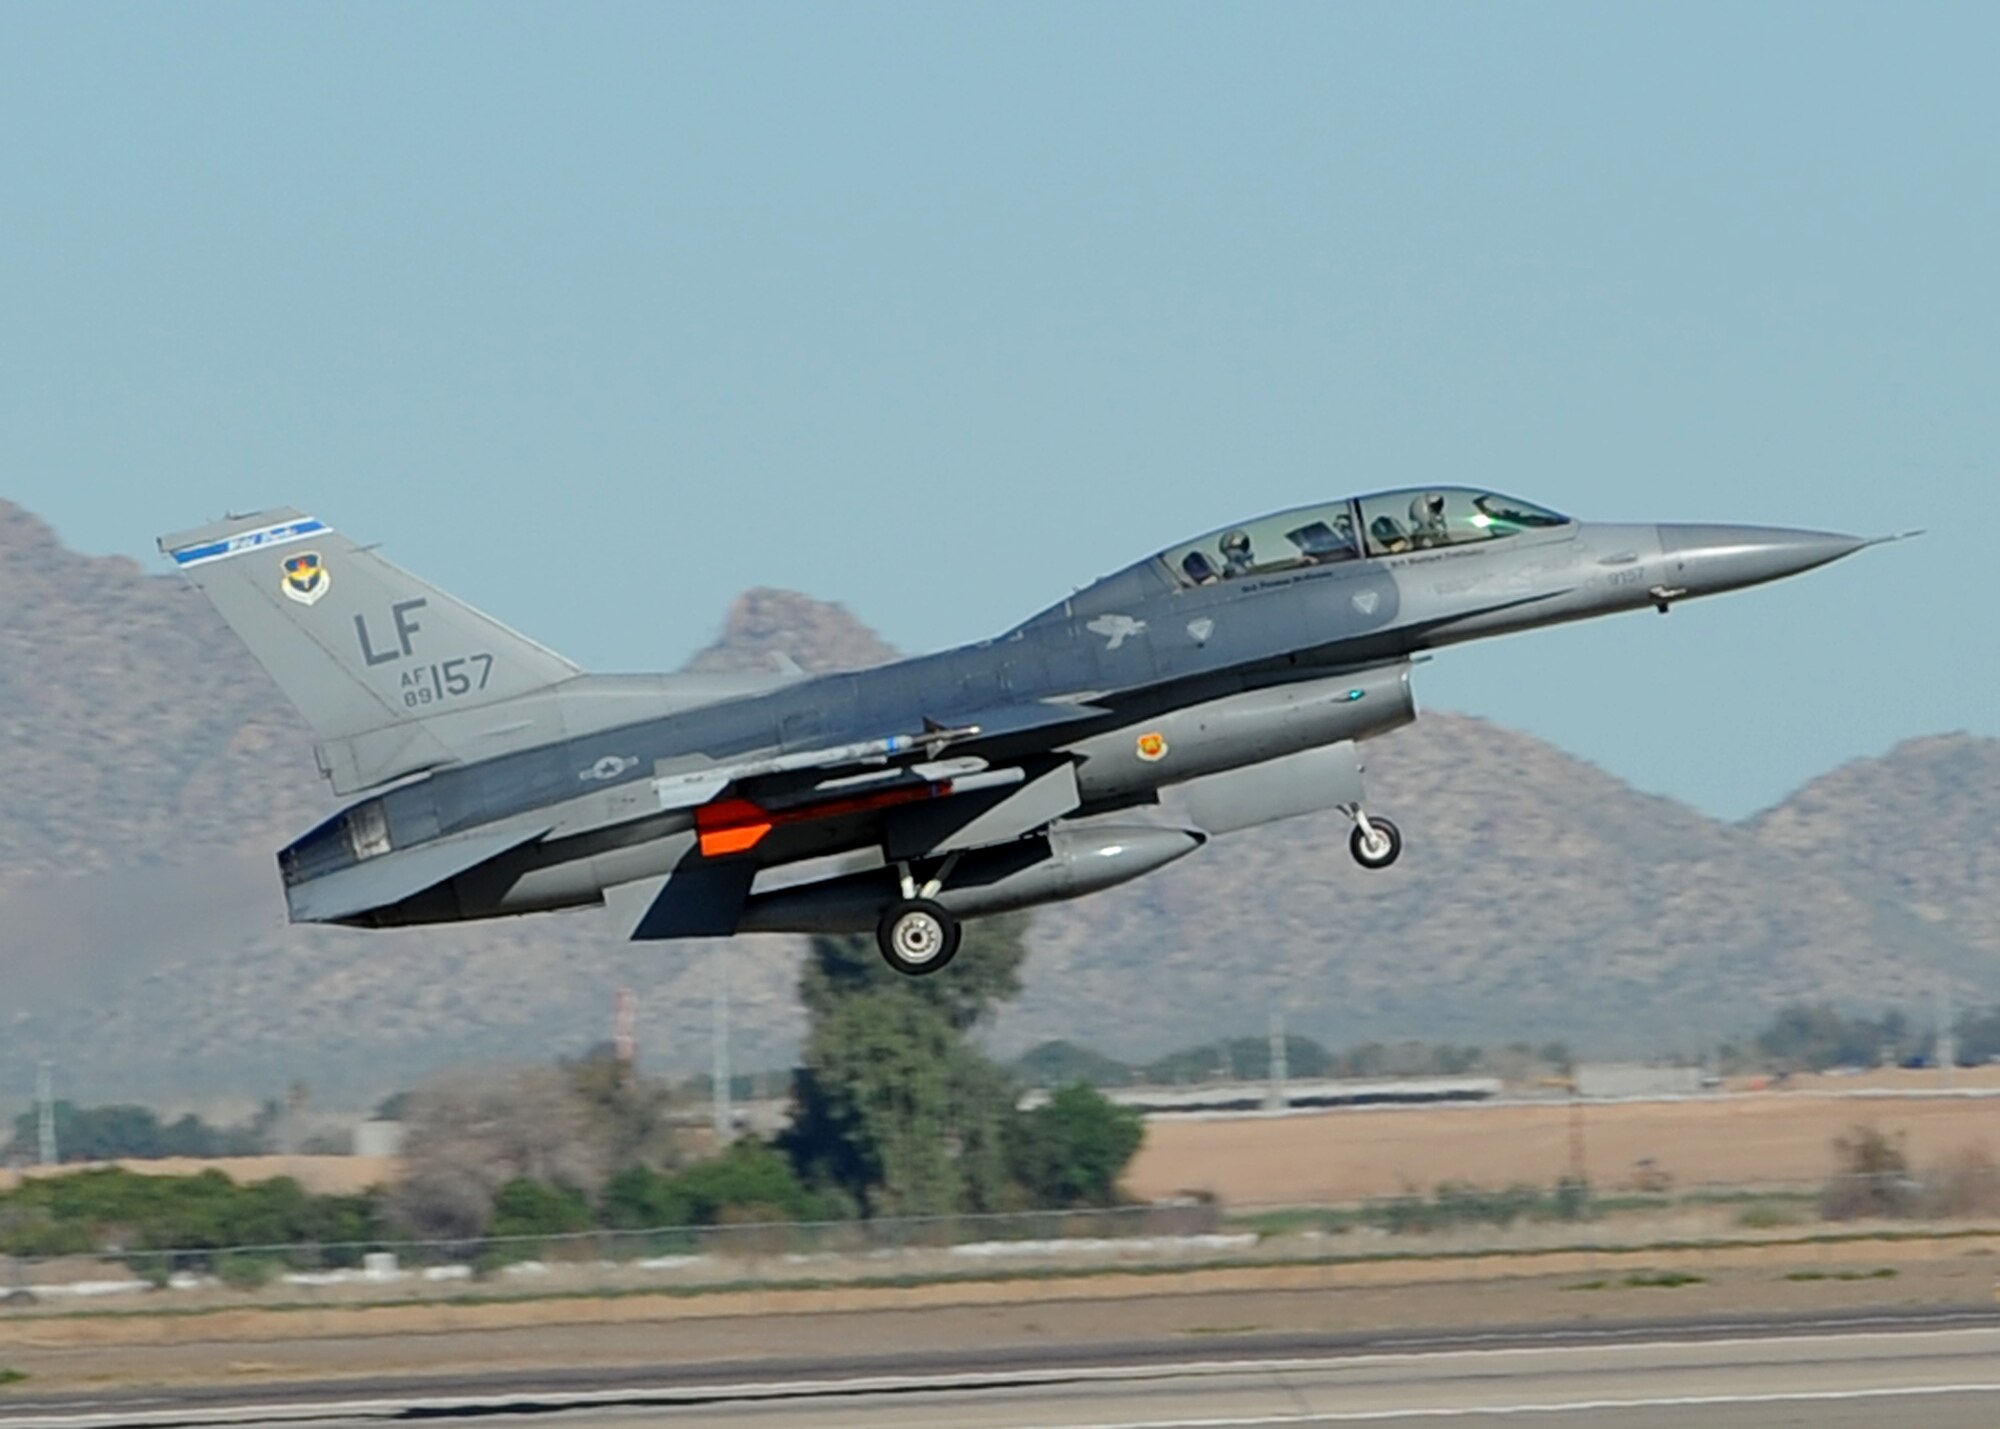 The millionth F-16 Fighting Falcon flying training hour at Luke Air Force Base was reached March 13. F-16s first touched down at Luke AFB on Dec. 6, 1982. To date, Luke has graduated 18,164 F-16 fighter pilots. Approximately 2,000 F-16 hours are flown a month by Luke pilots and students. (U.S. Air Force photo/Airman 1st Class Devante Williams)